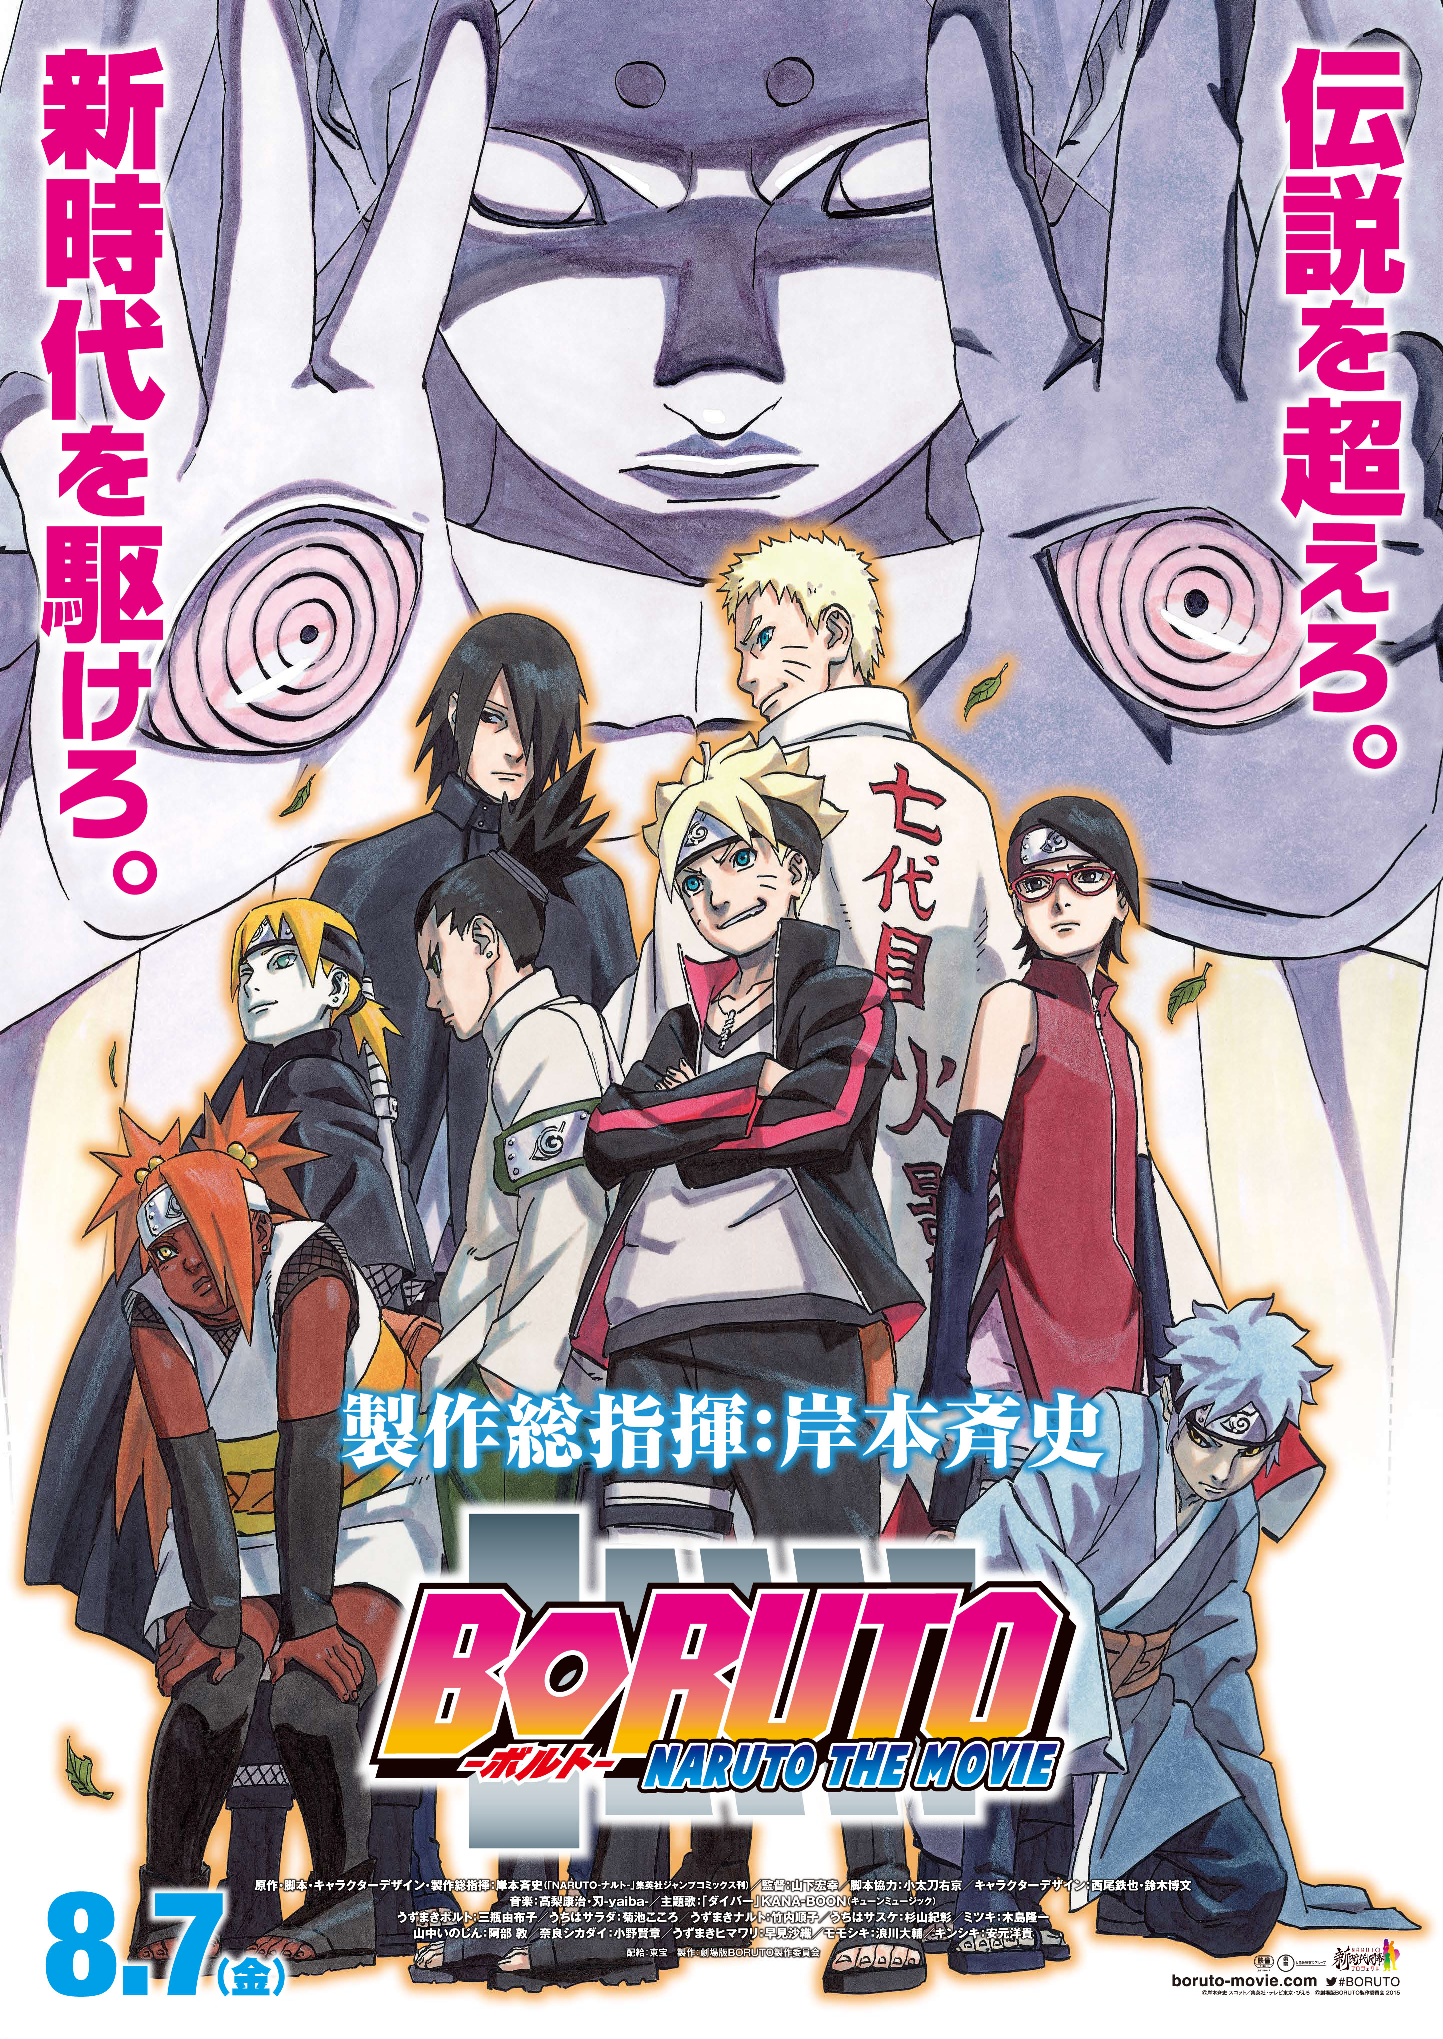 Does anyone think that the reason why boruto gets so much hate is because  people are always thinking about or comparing it to the Naruto franchise  when watching or reading it instead